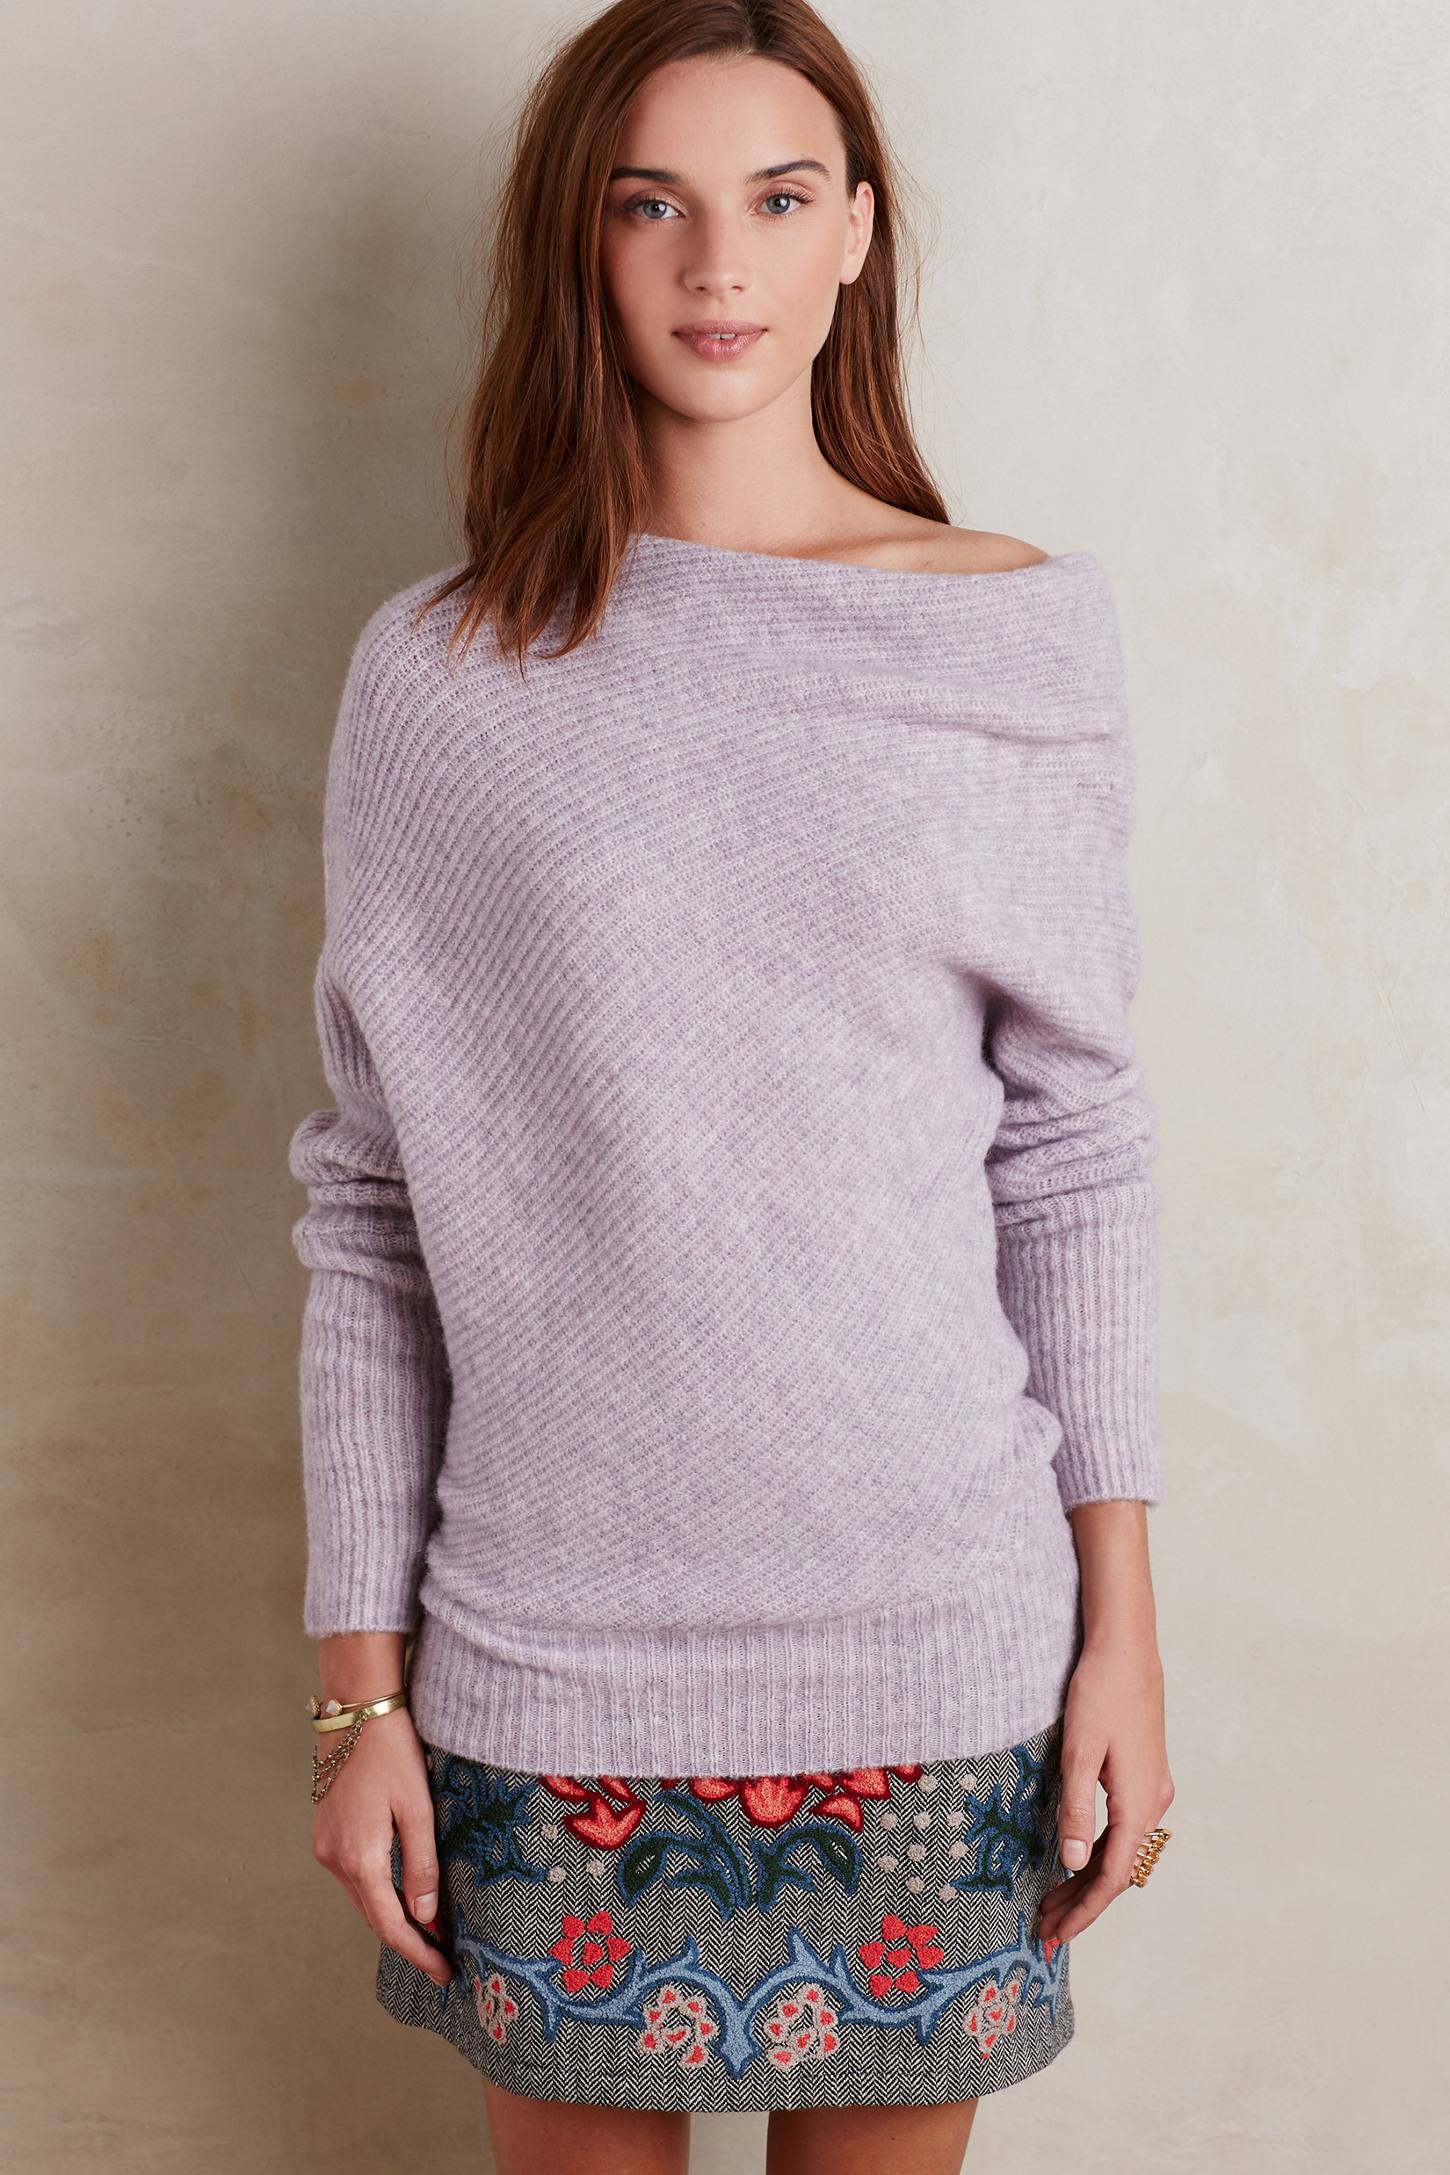 Draped Pullover from Anthropologie